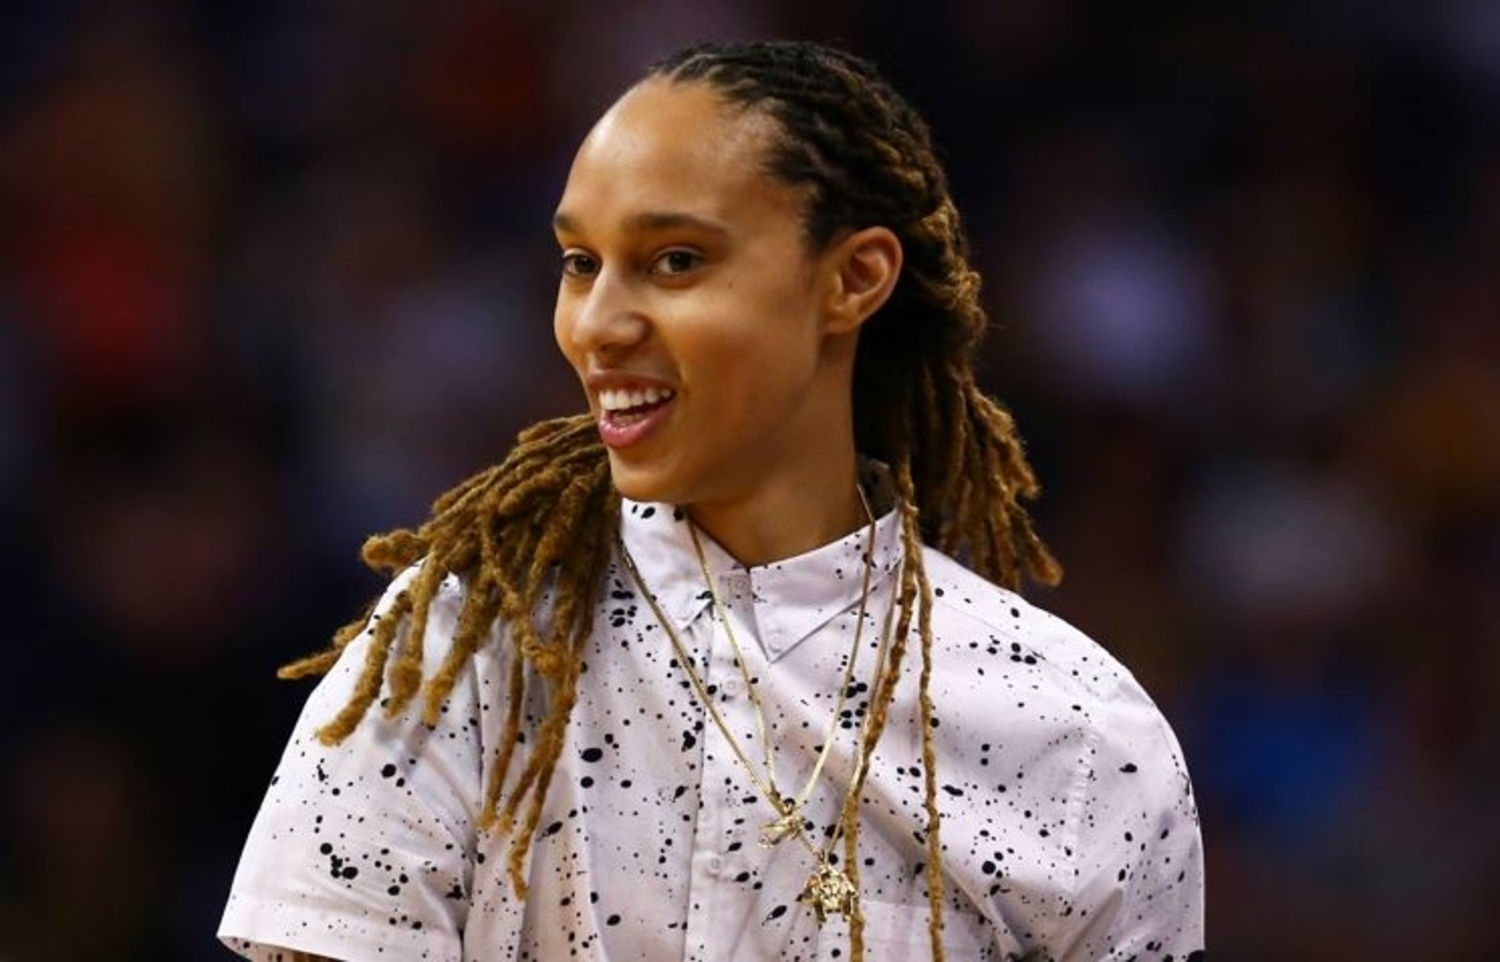 Teammate Reveals How Long Brittney Griner Has Been Detained In Russia